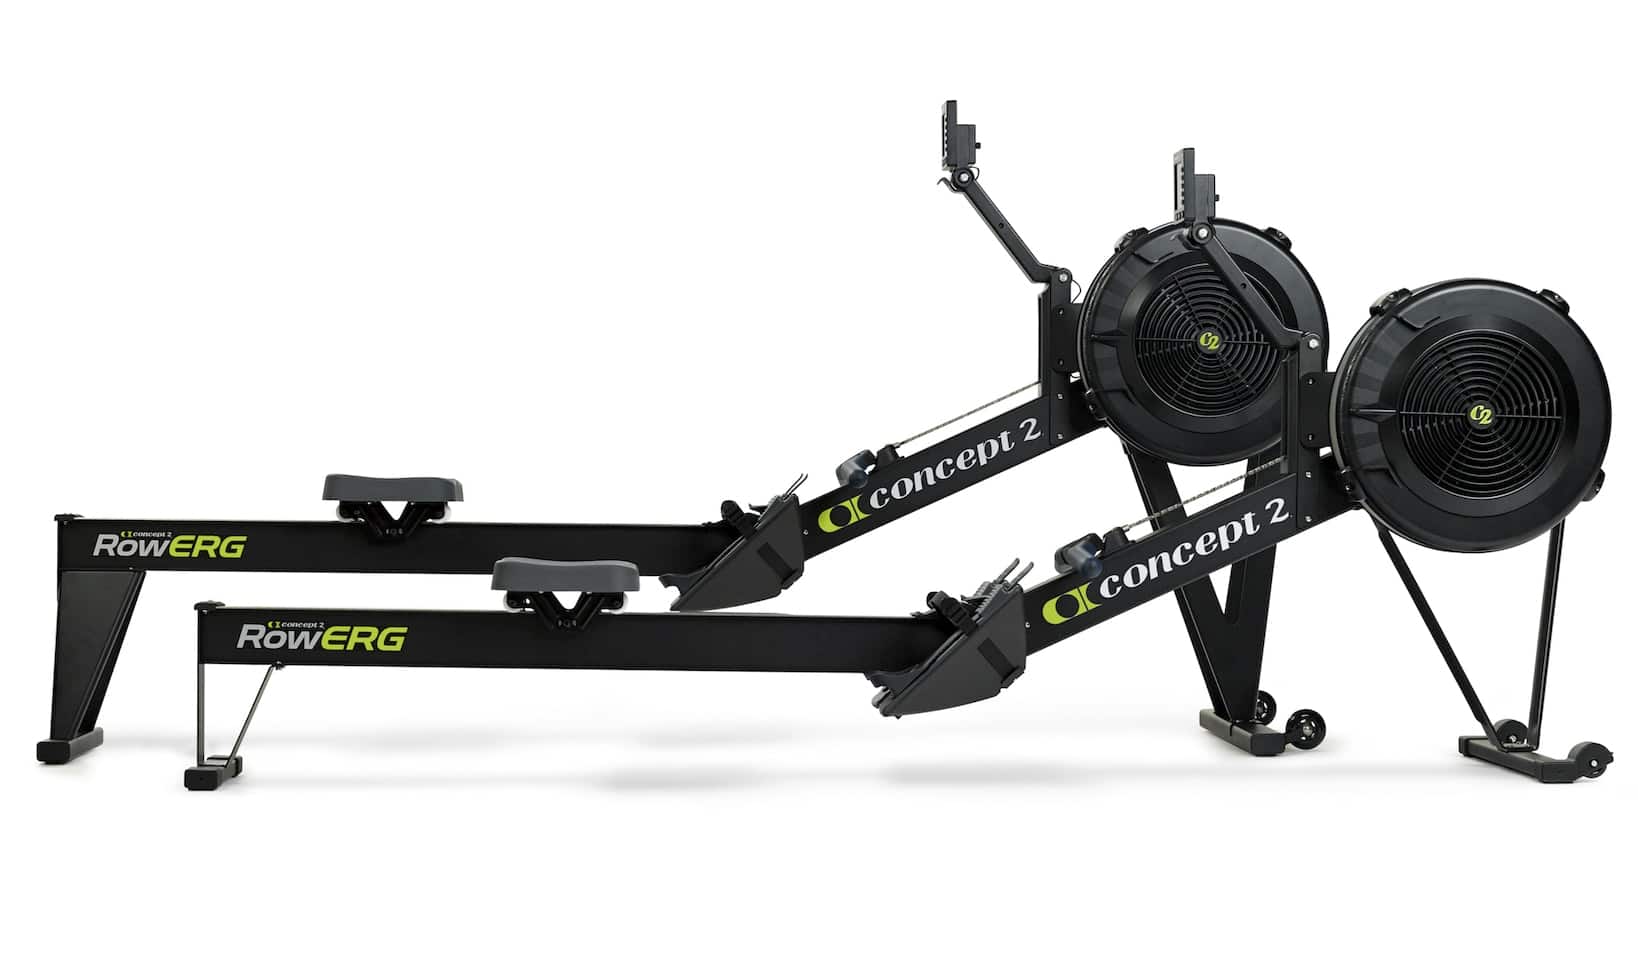 5 Surprising Things You Didn't Know About the Concept2 Rowerg